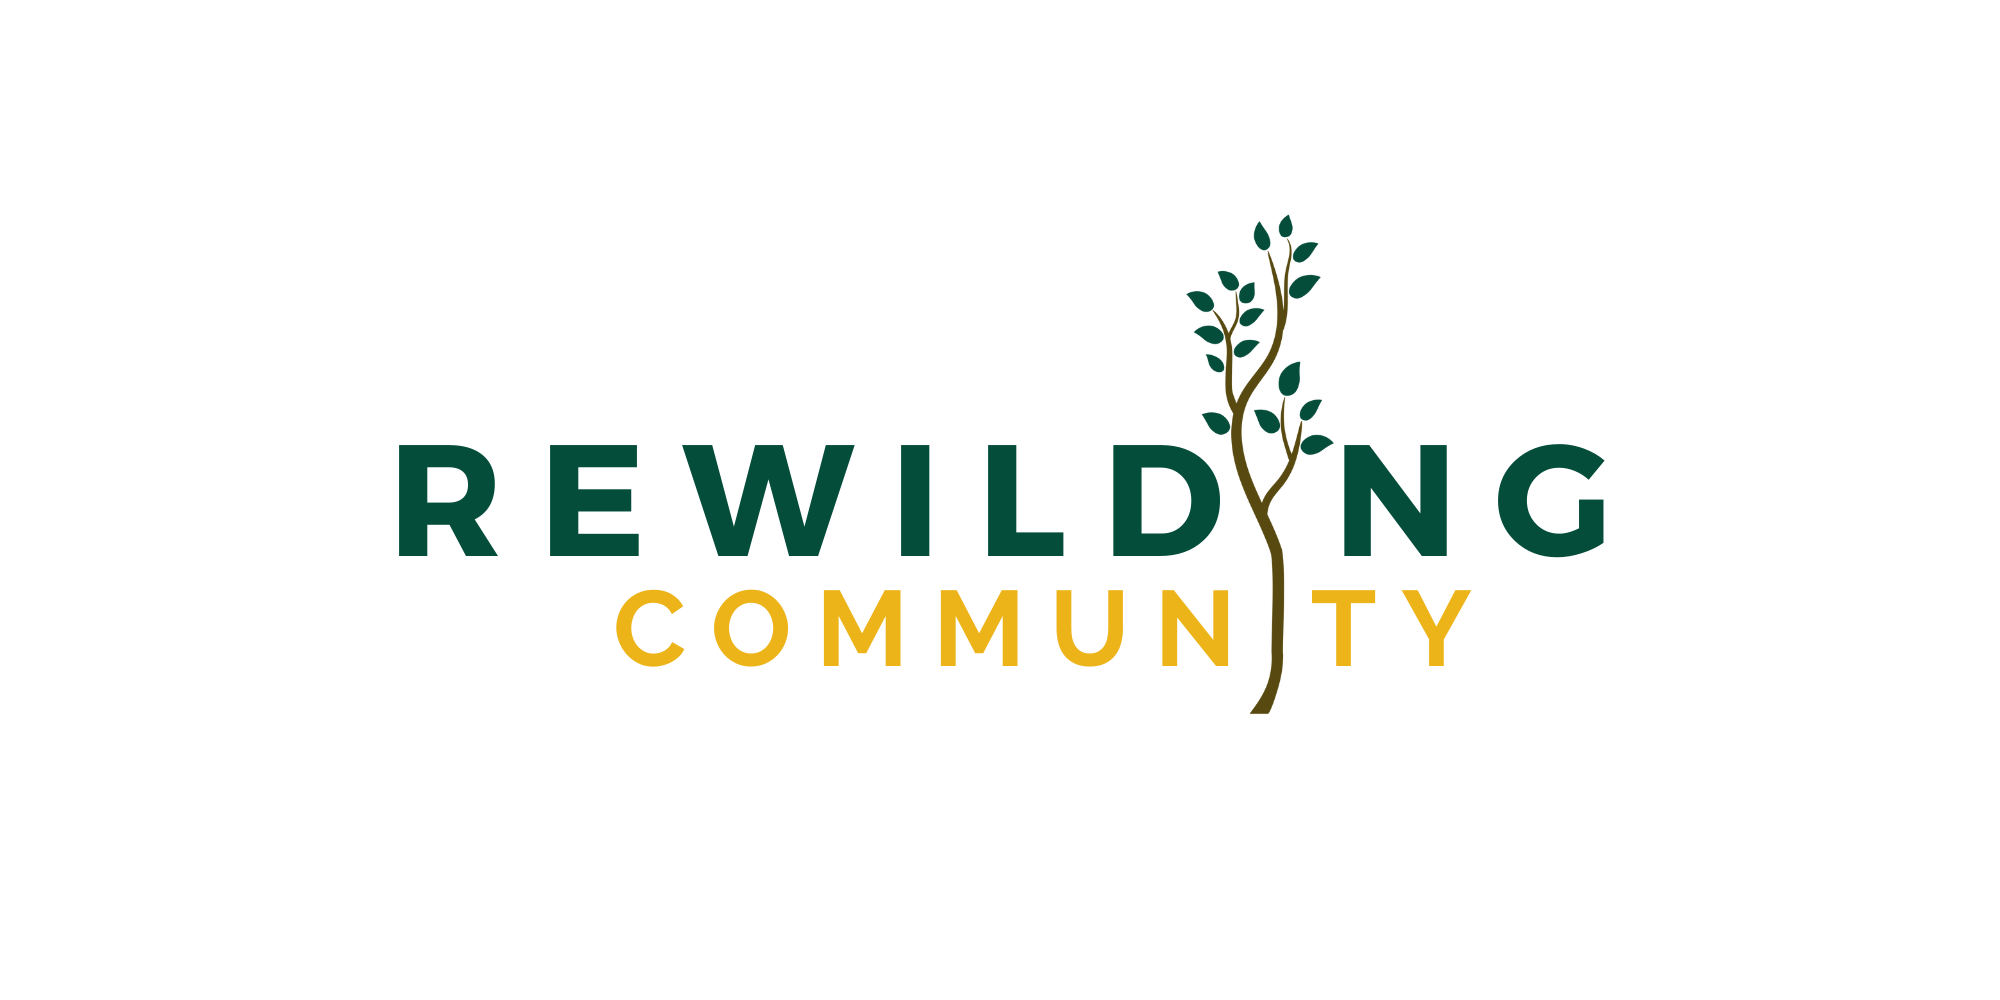 Join the Community - The Rewilding Community